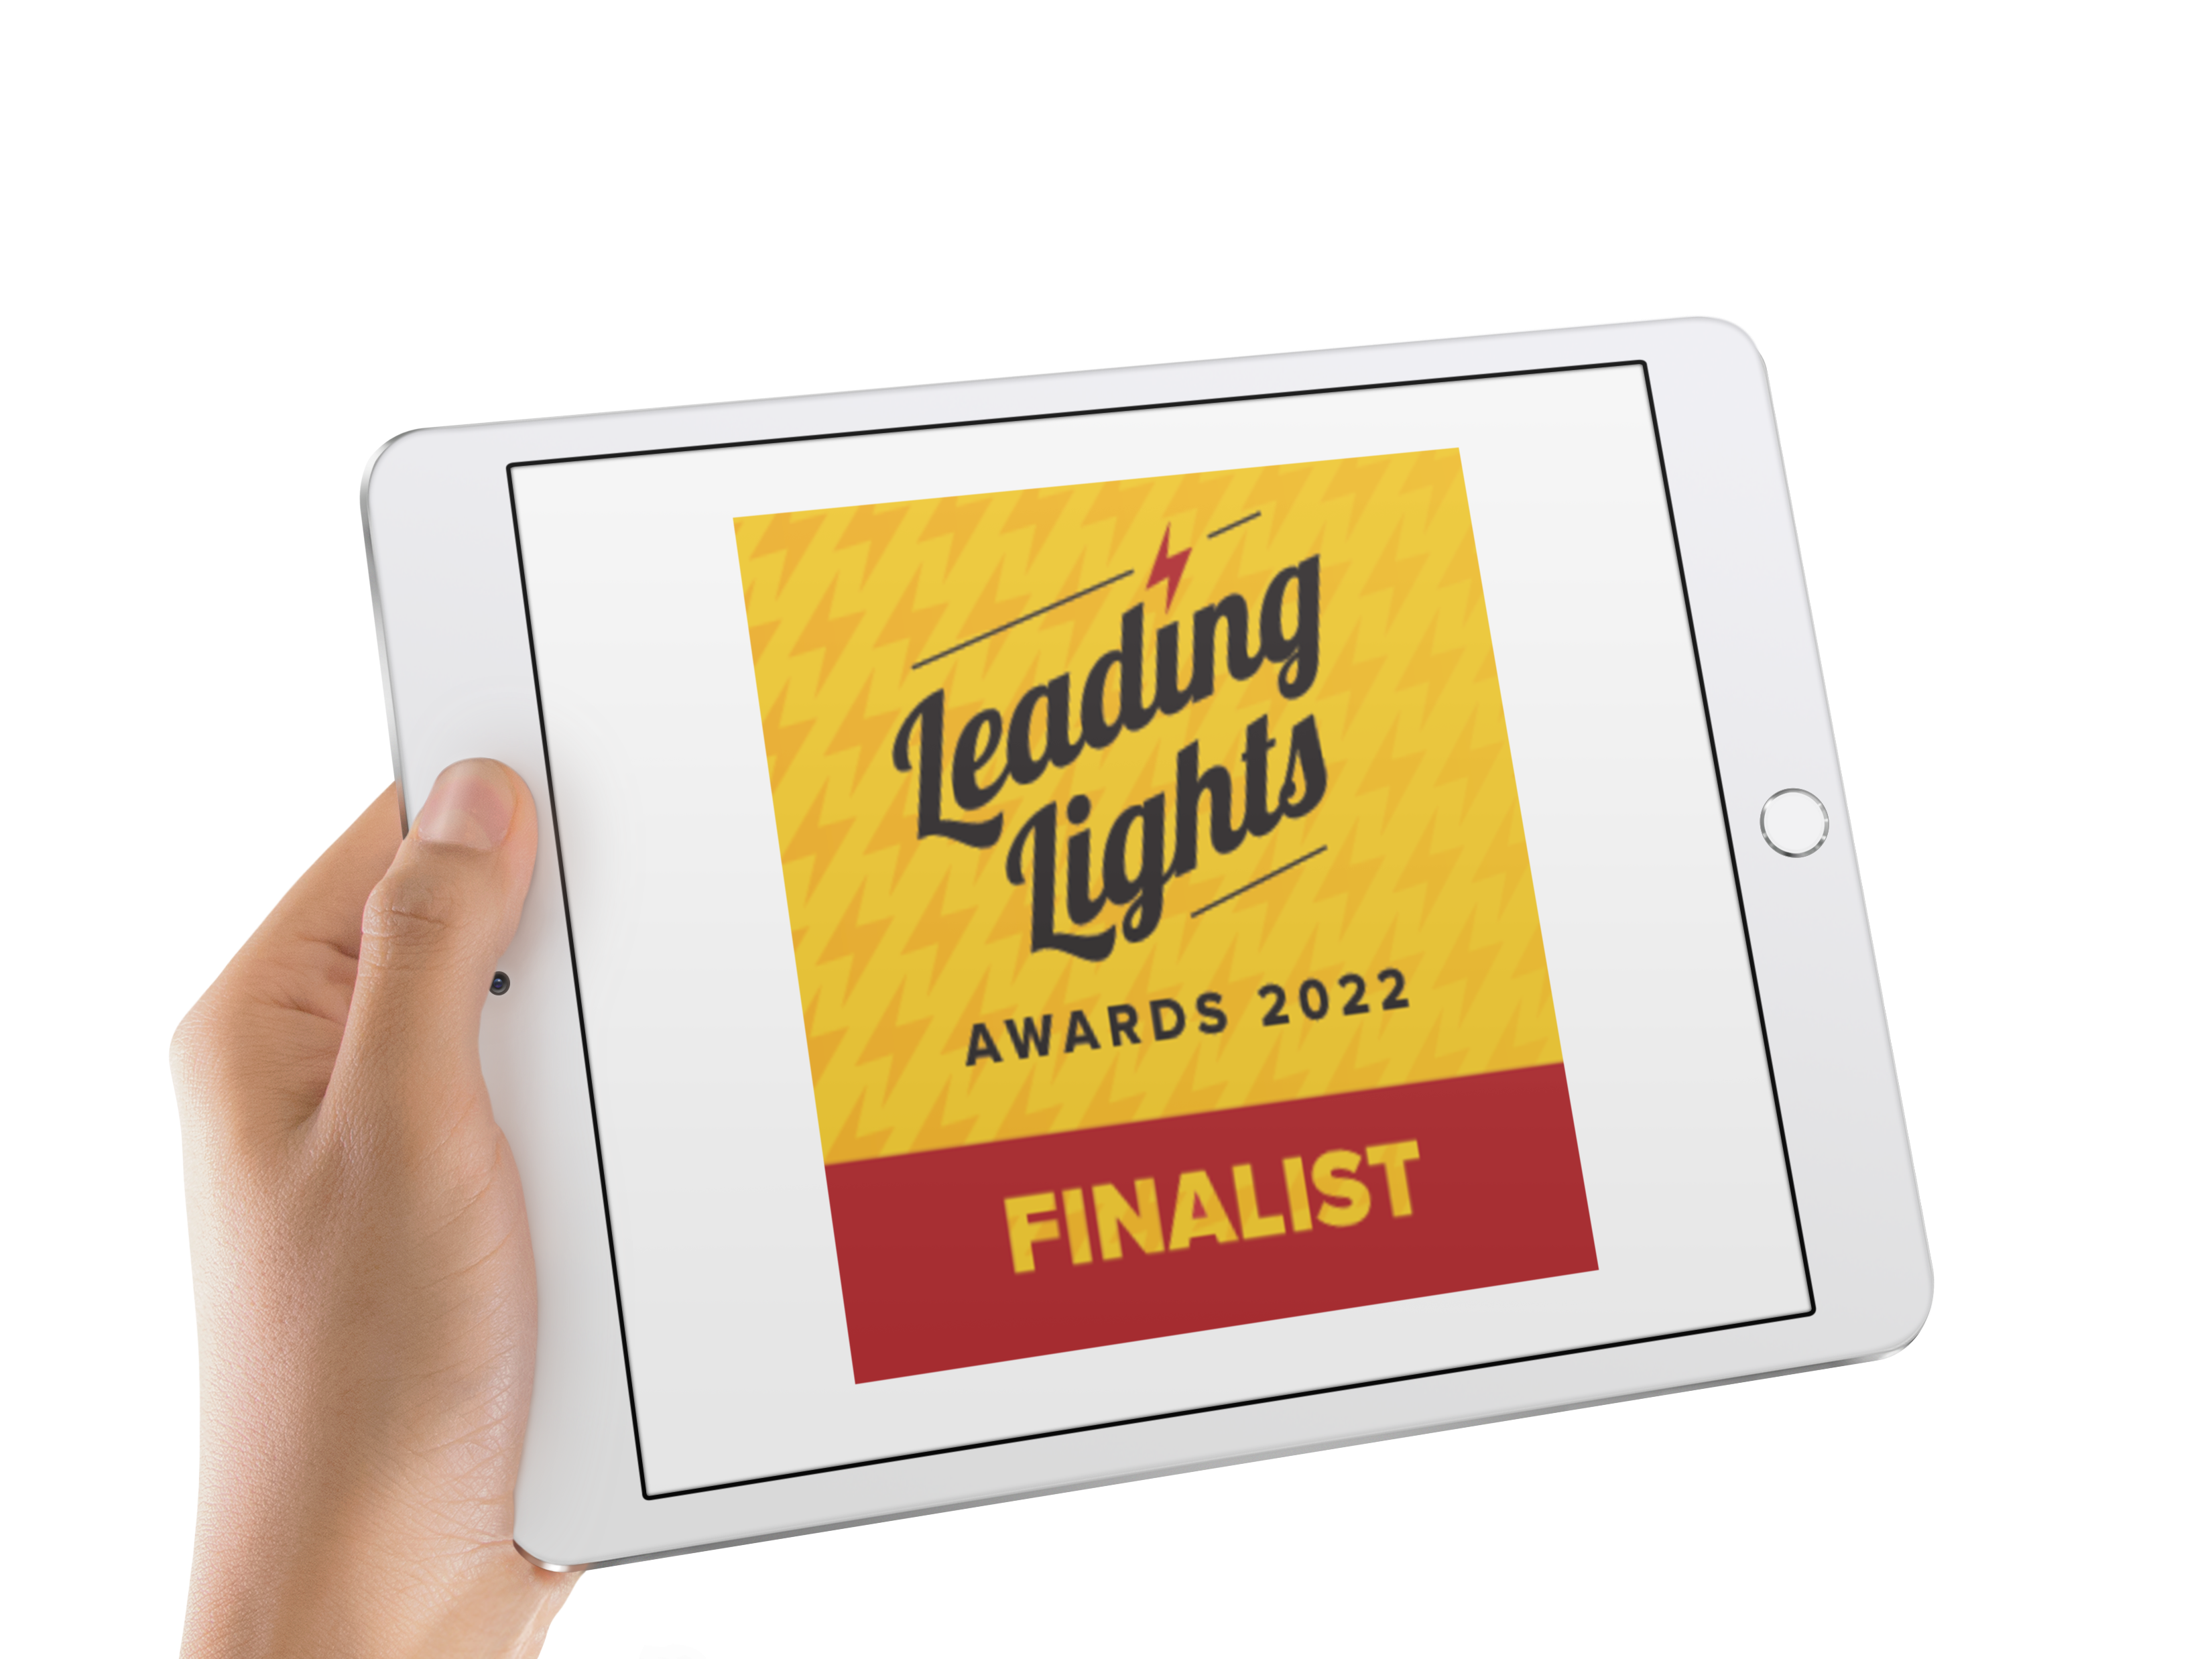 A white iPad is held by a man in a landscape position, displaying DZS as a Leading Lights Award 2022 Finalist.